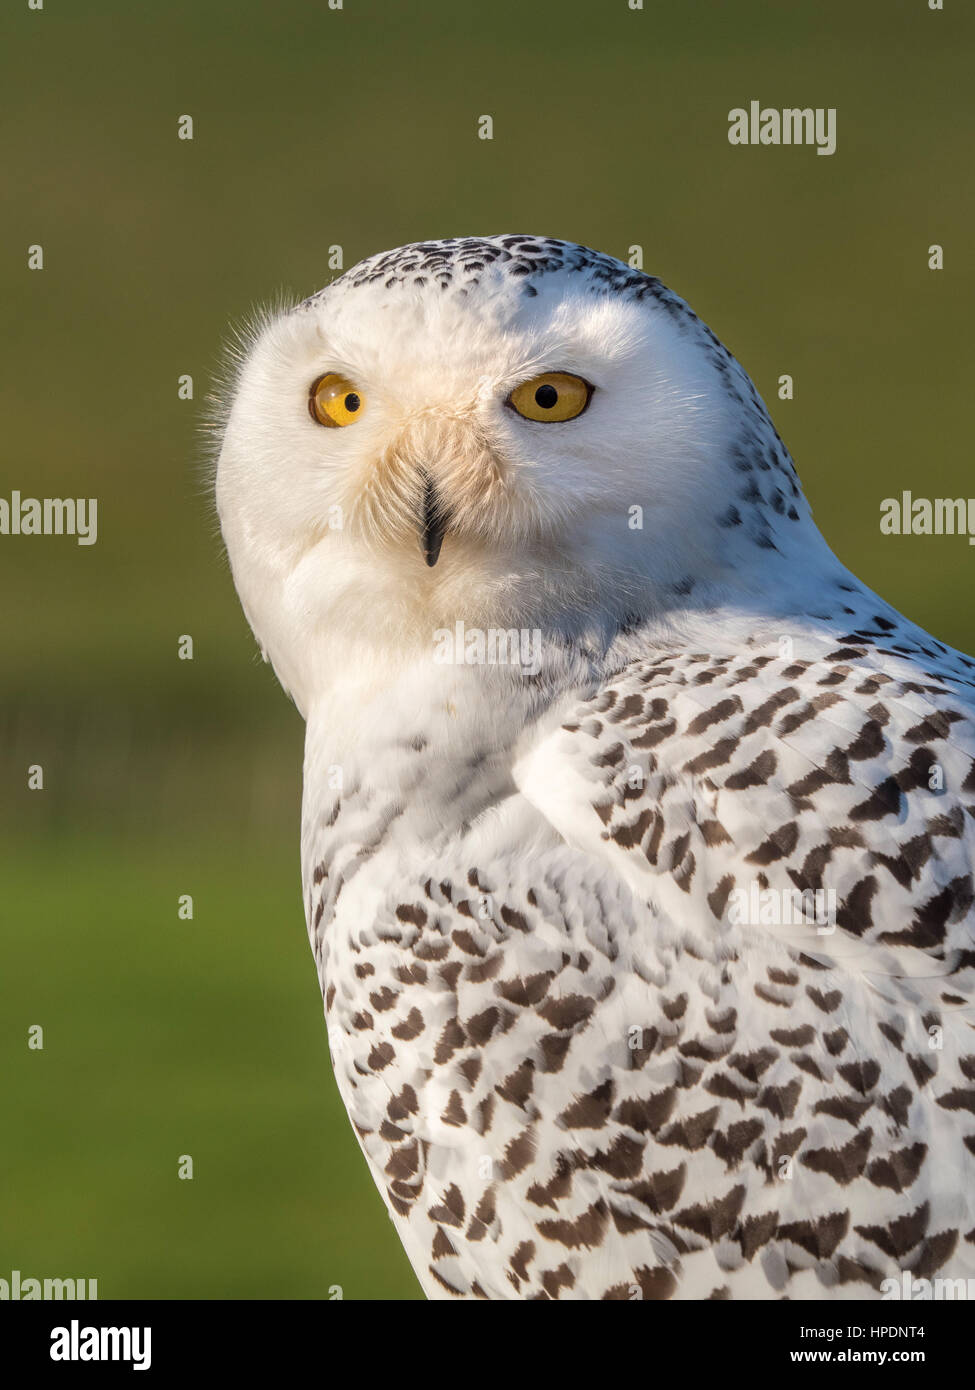 Close up of Snowy Owl Banque D'Images